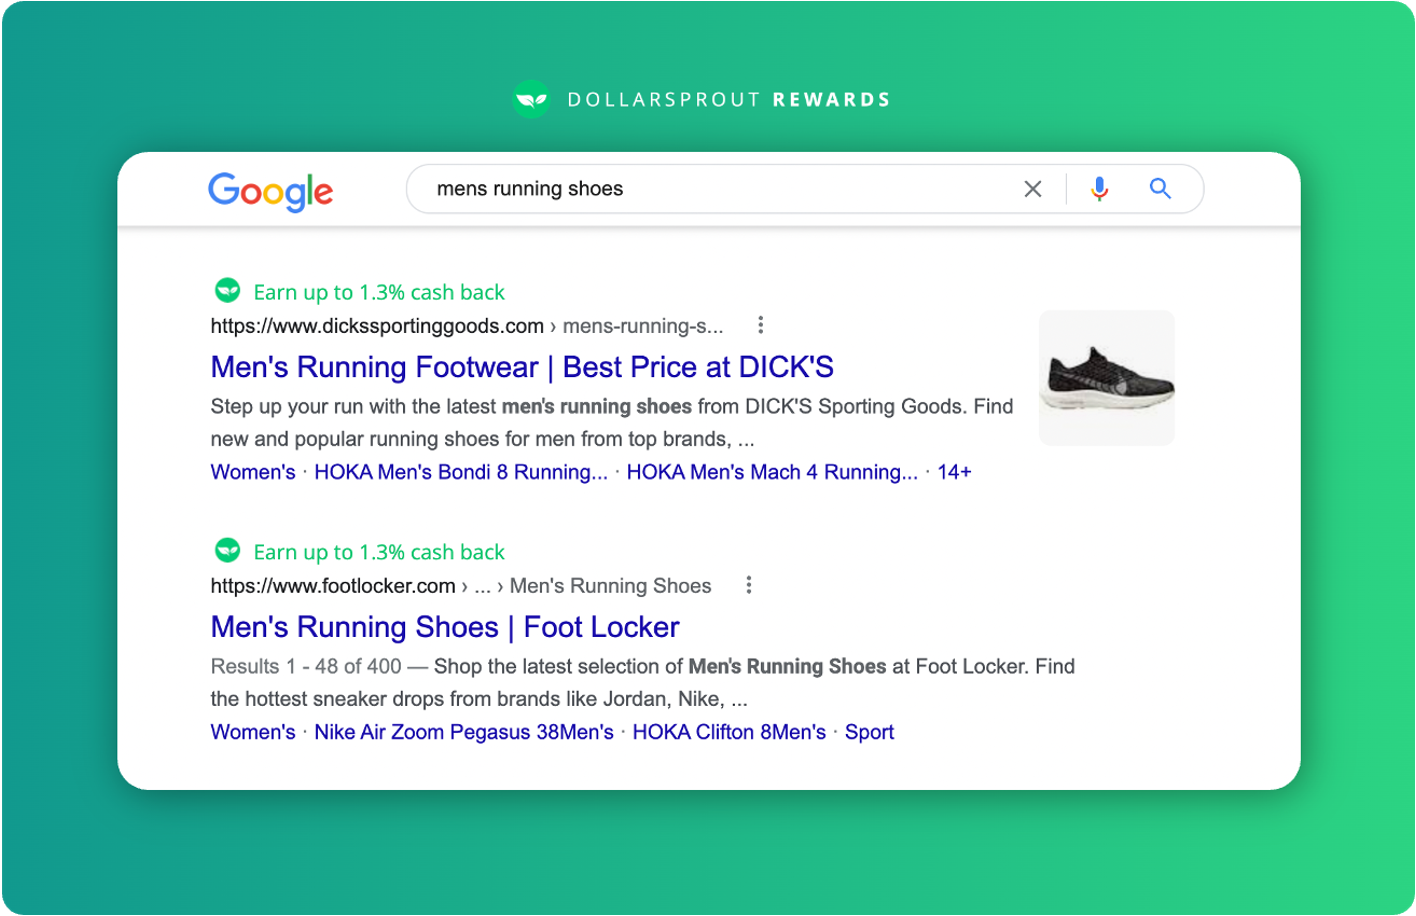 DollarSprout Rewards cash back browser extension showing deals in Google search results